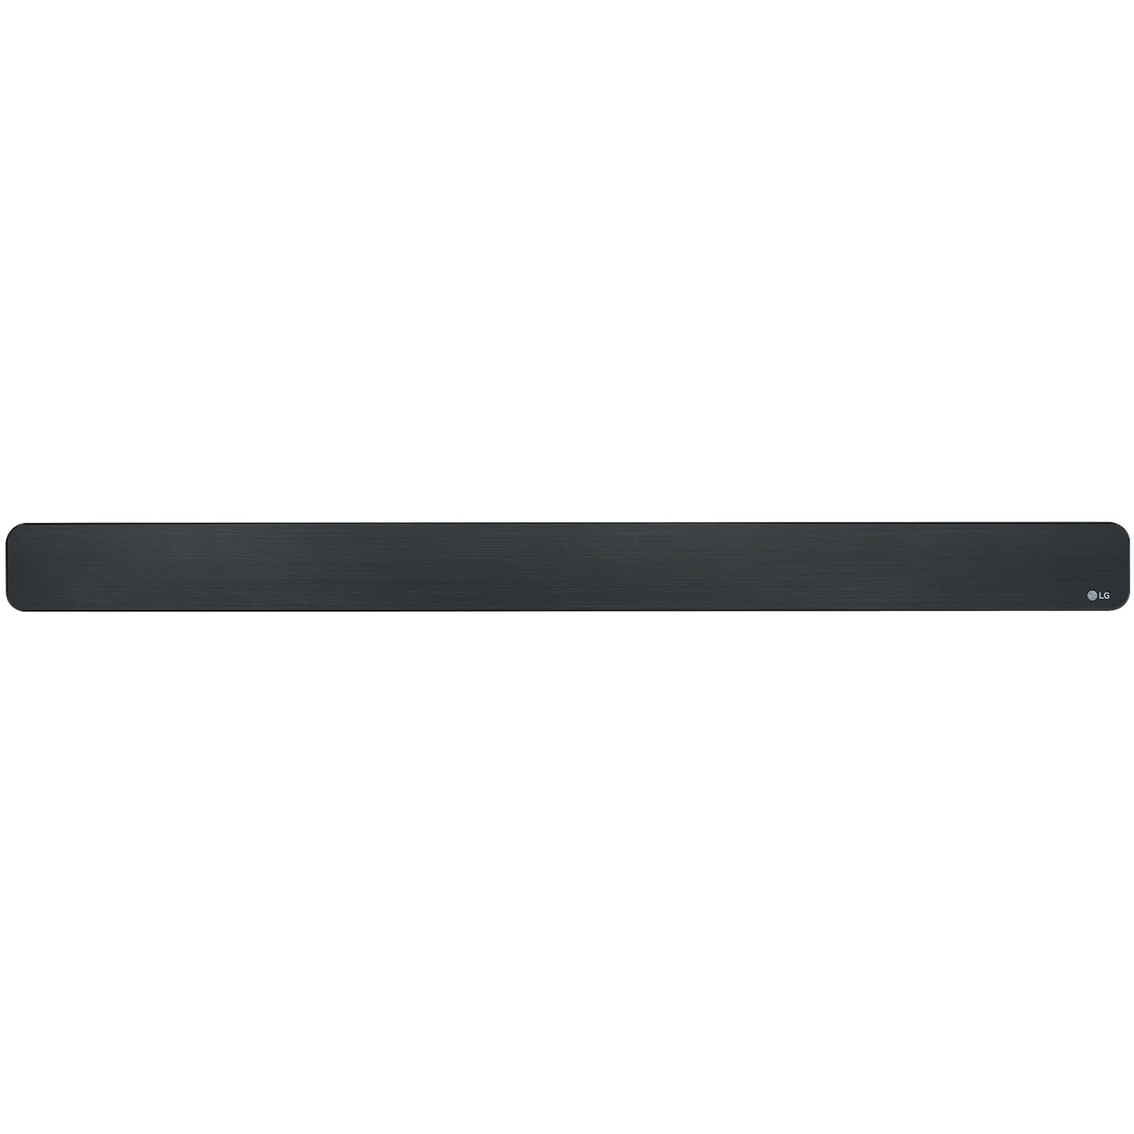 LG 3.1 Channel High Res Audio Sound Bar with Built-In Chromecast - Image 3 of 9